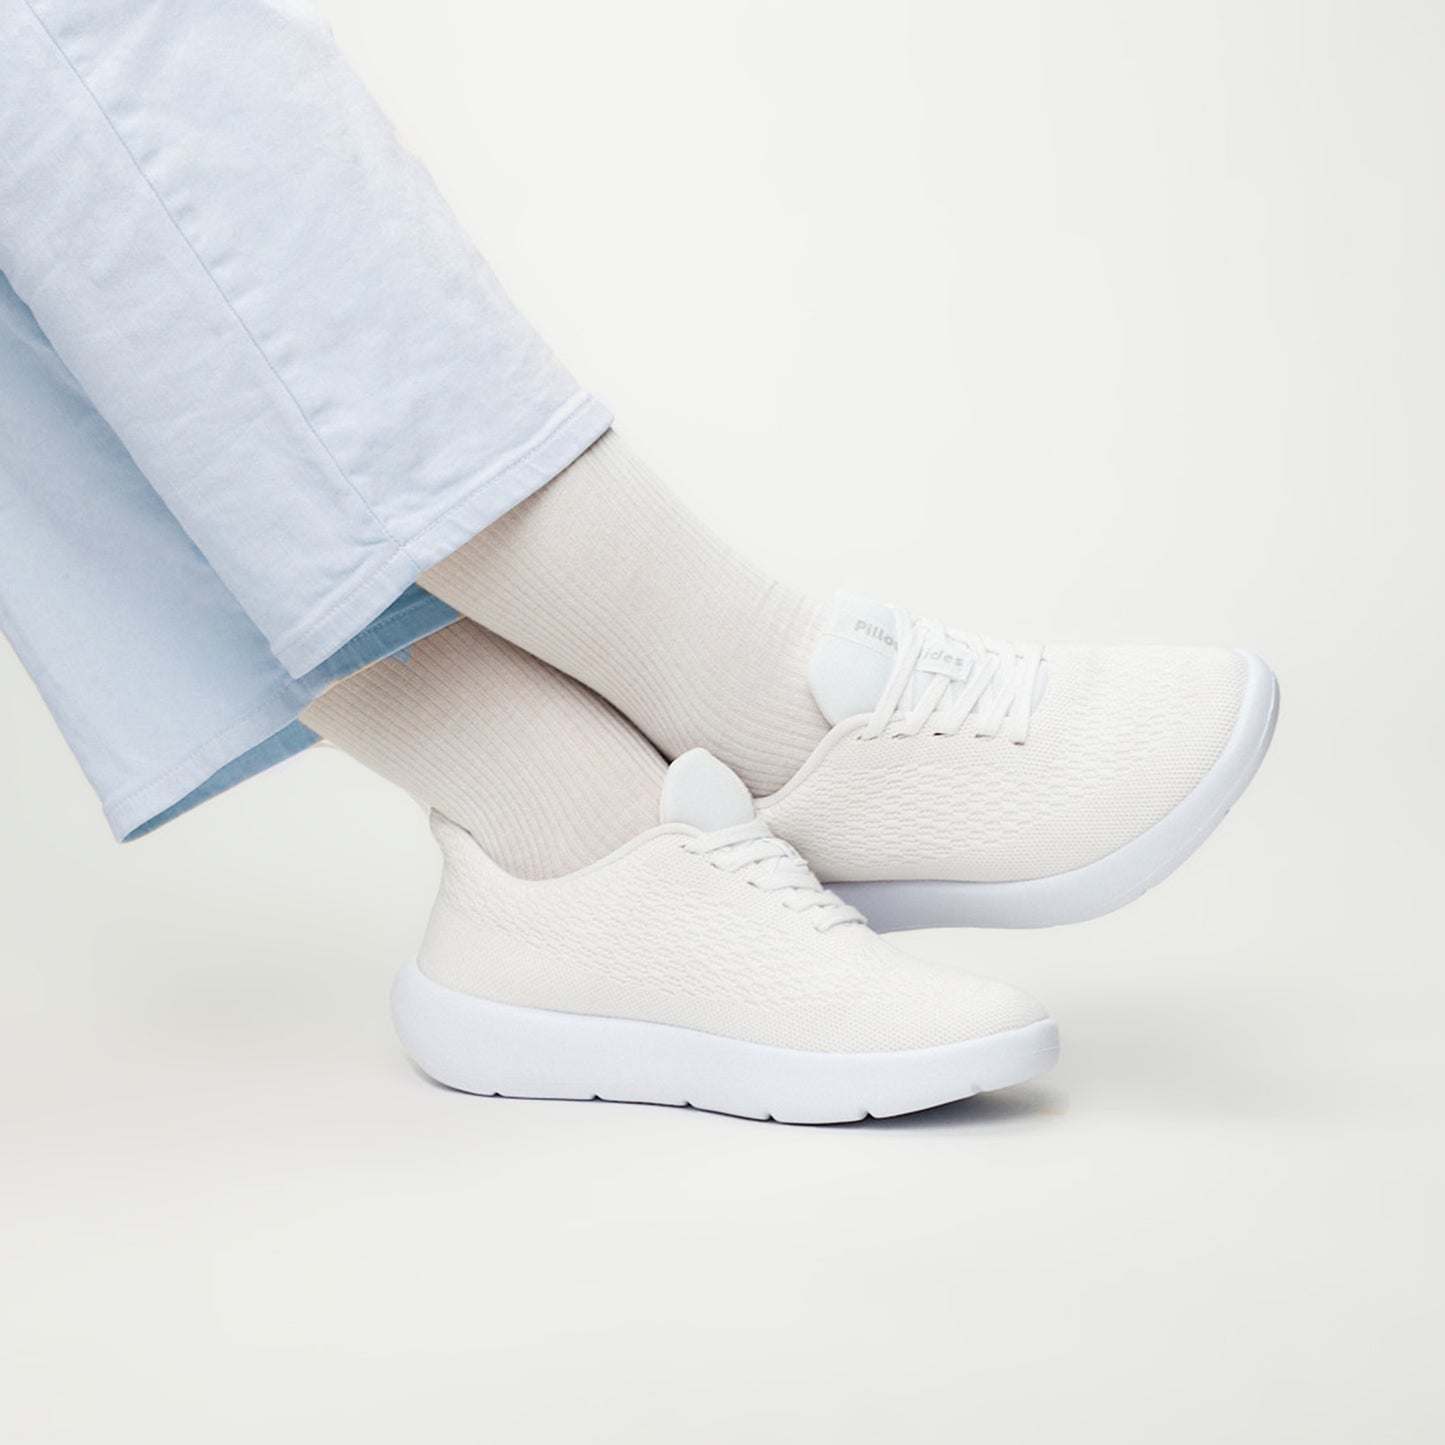 Stock white sneakers being worn with white backdrop